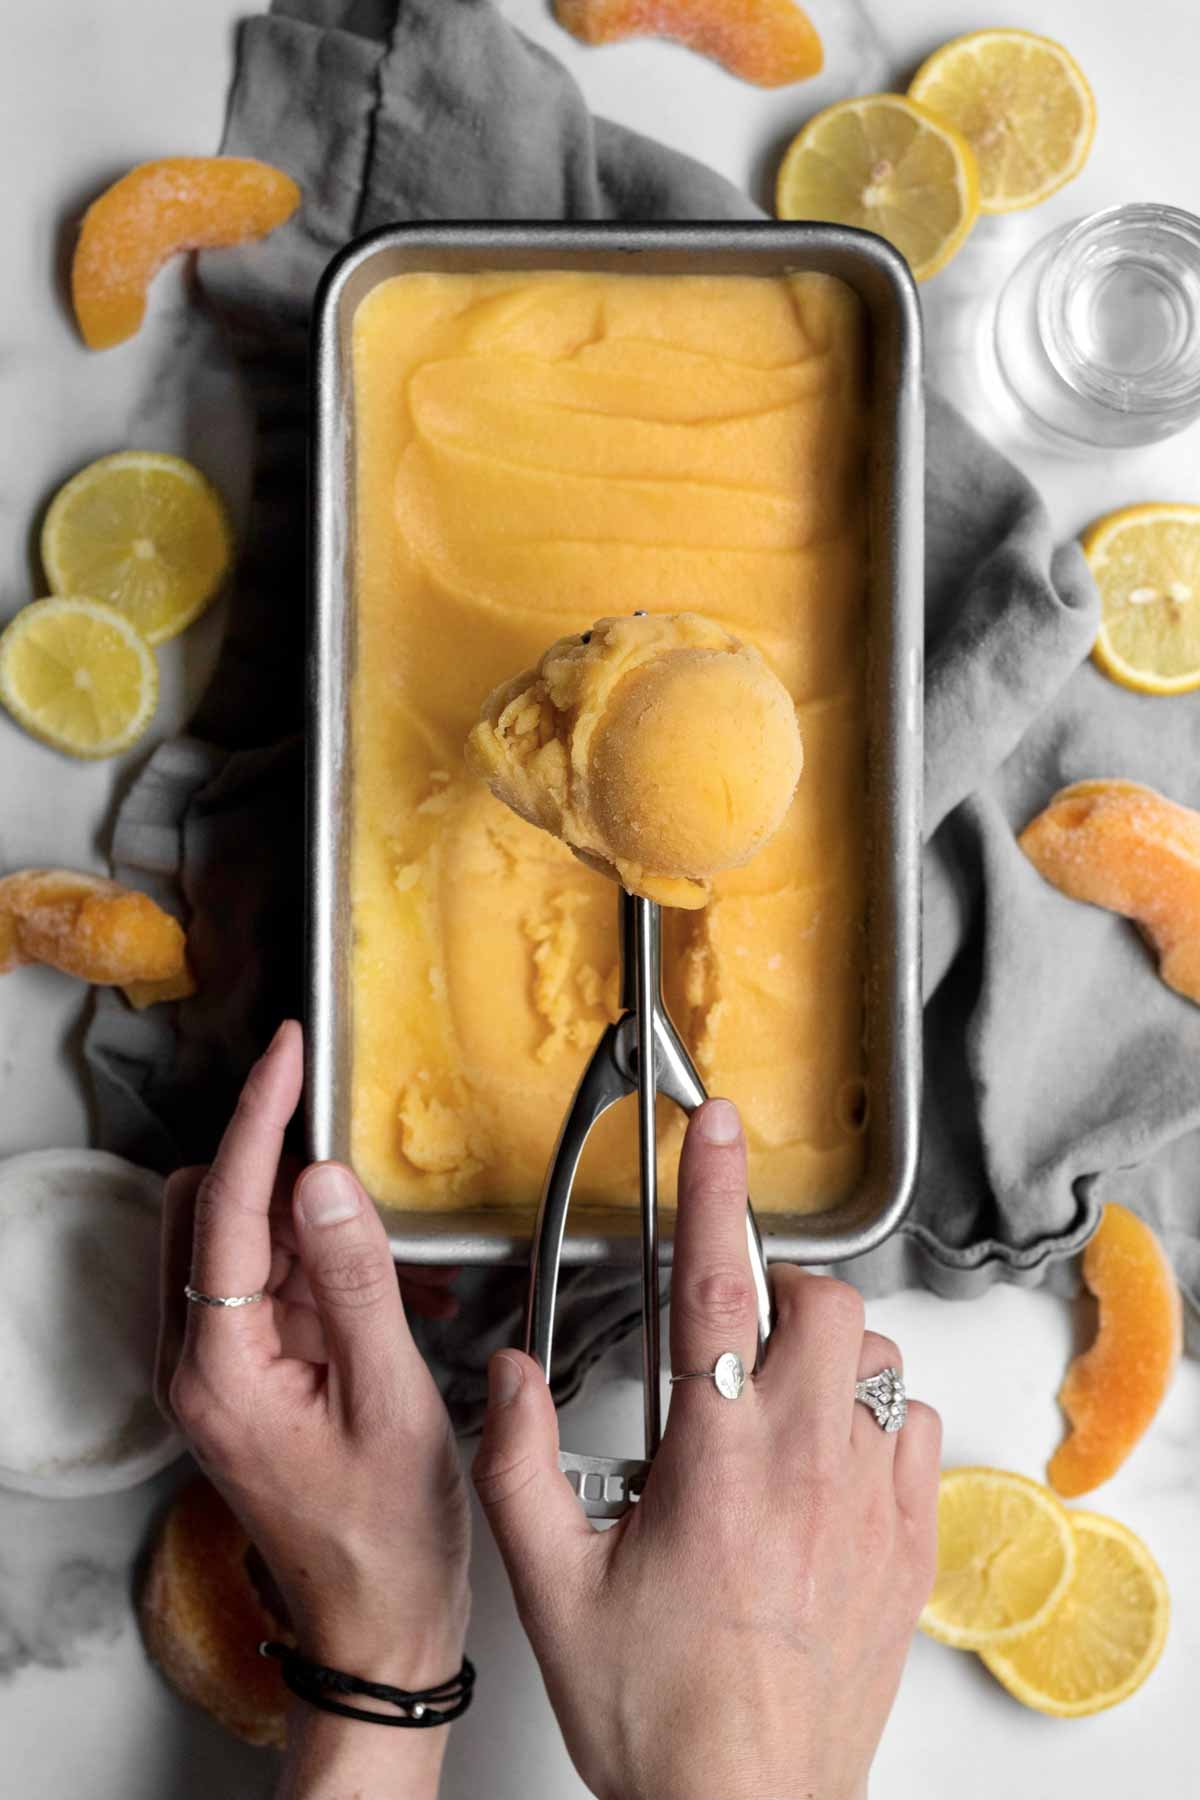 Scooping out orange Peach Sorbet from the pan.